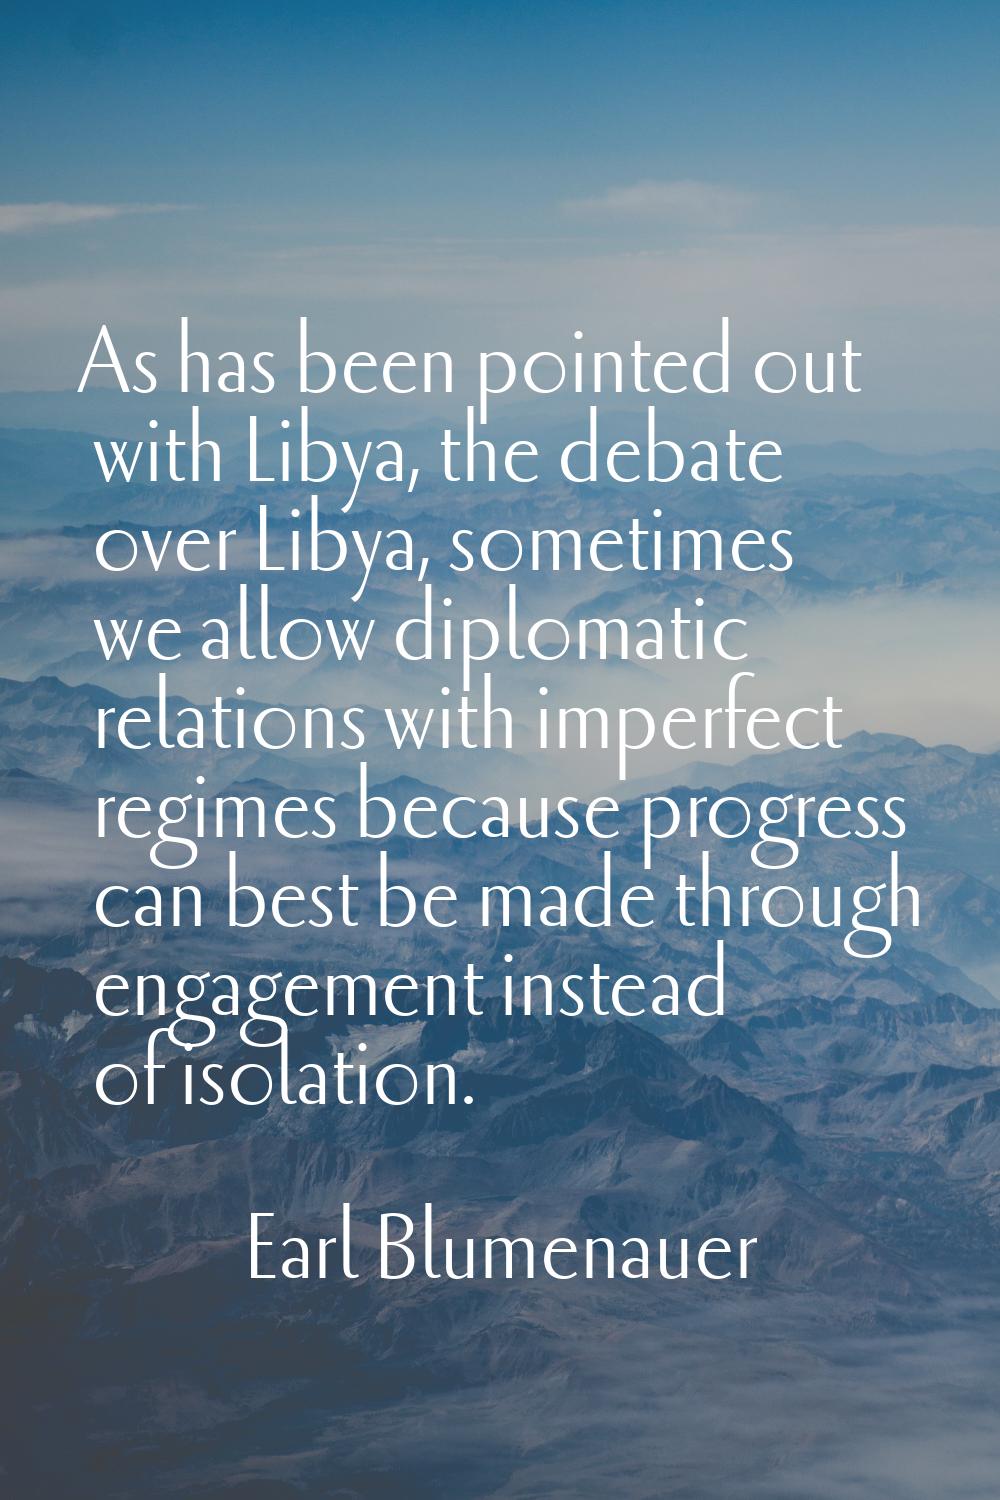 As has been pointed out with Libya, the debate over Libya, sometimes we allow diplomatic relations 